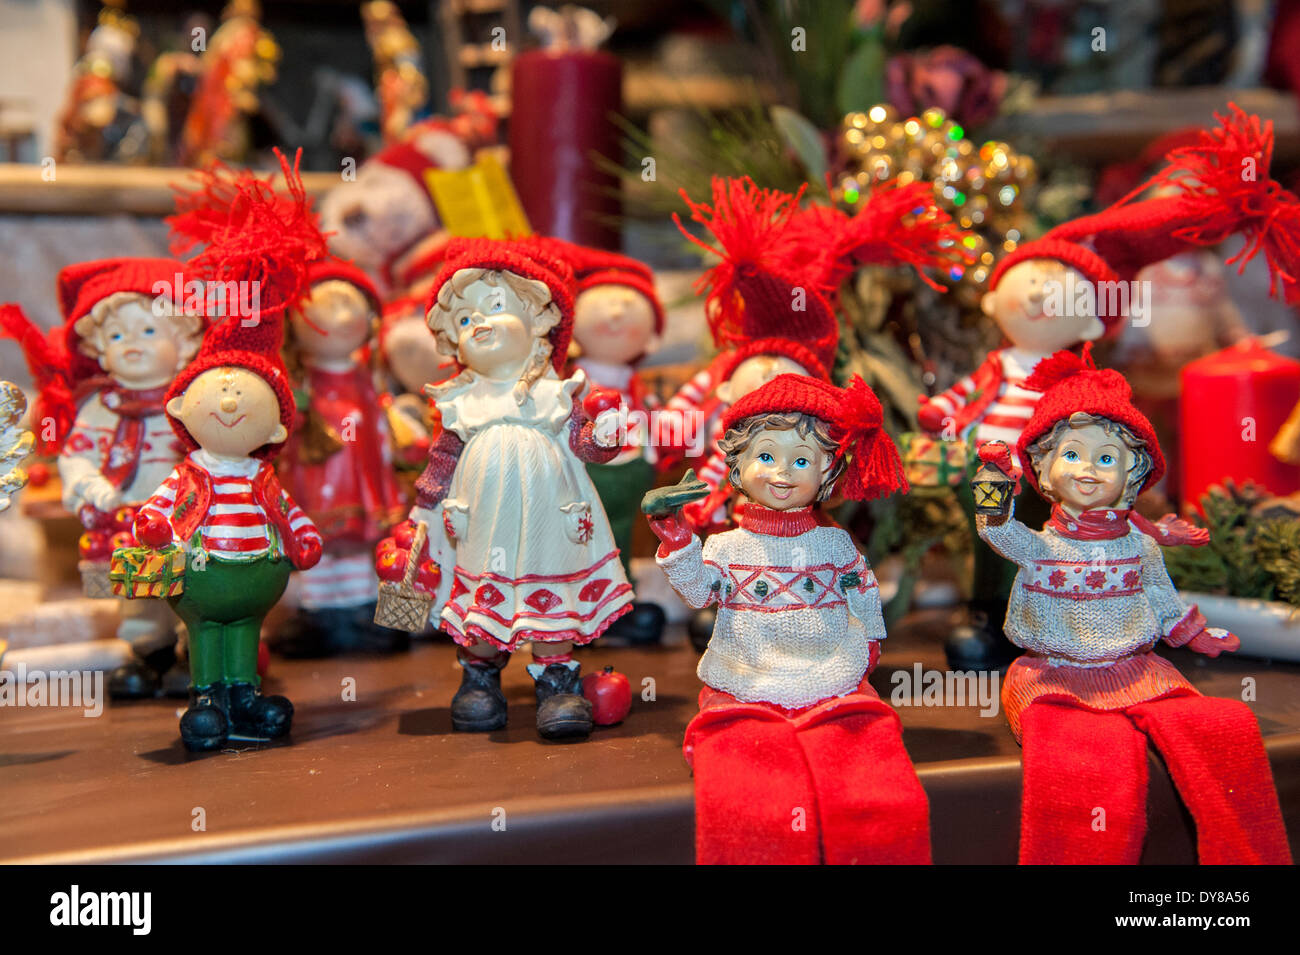 Hummel Figurines High Resolution Stock Photography and Images - Alamy